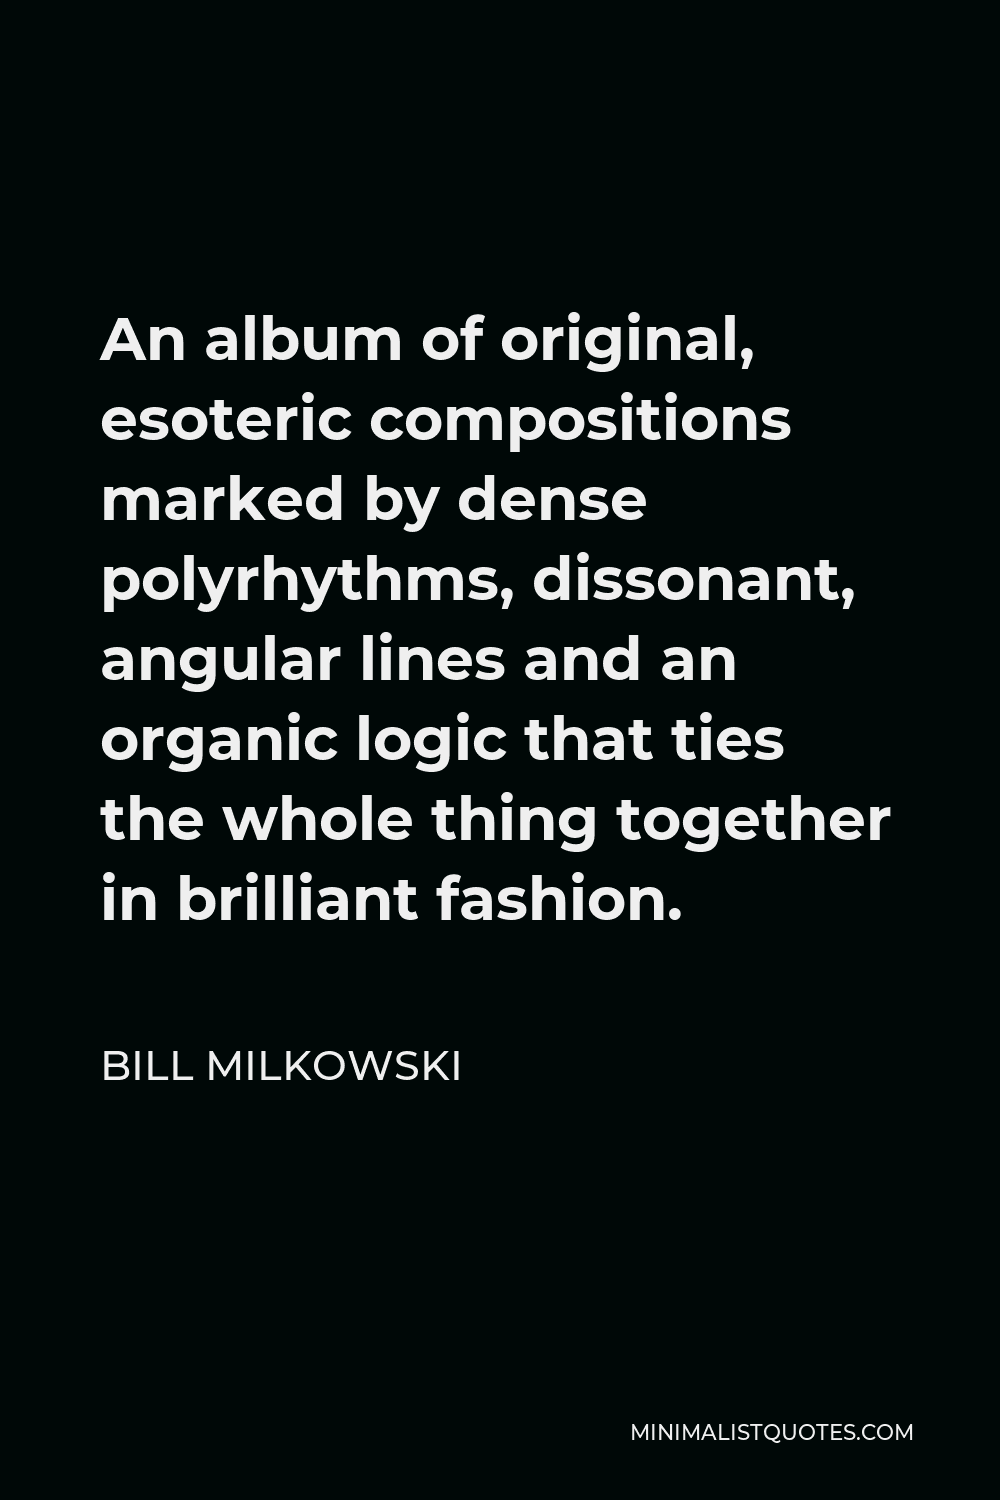 Bill Milkowski Quote - An album of original, esoteric compositions marked by dense polyrhythms, dissonant, angular lines and an organic logic that ties the whole thing together in brilliant fashion.